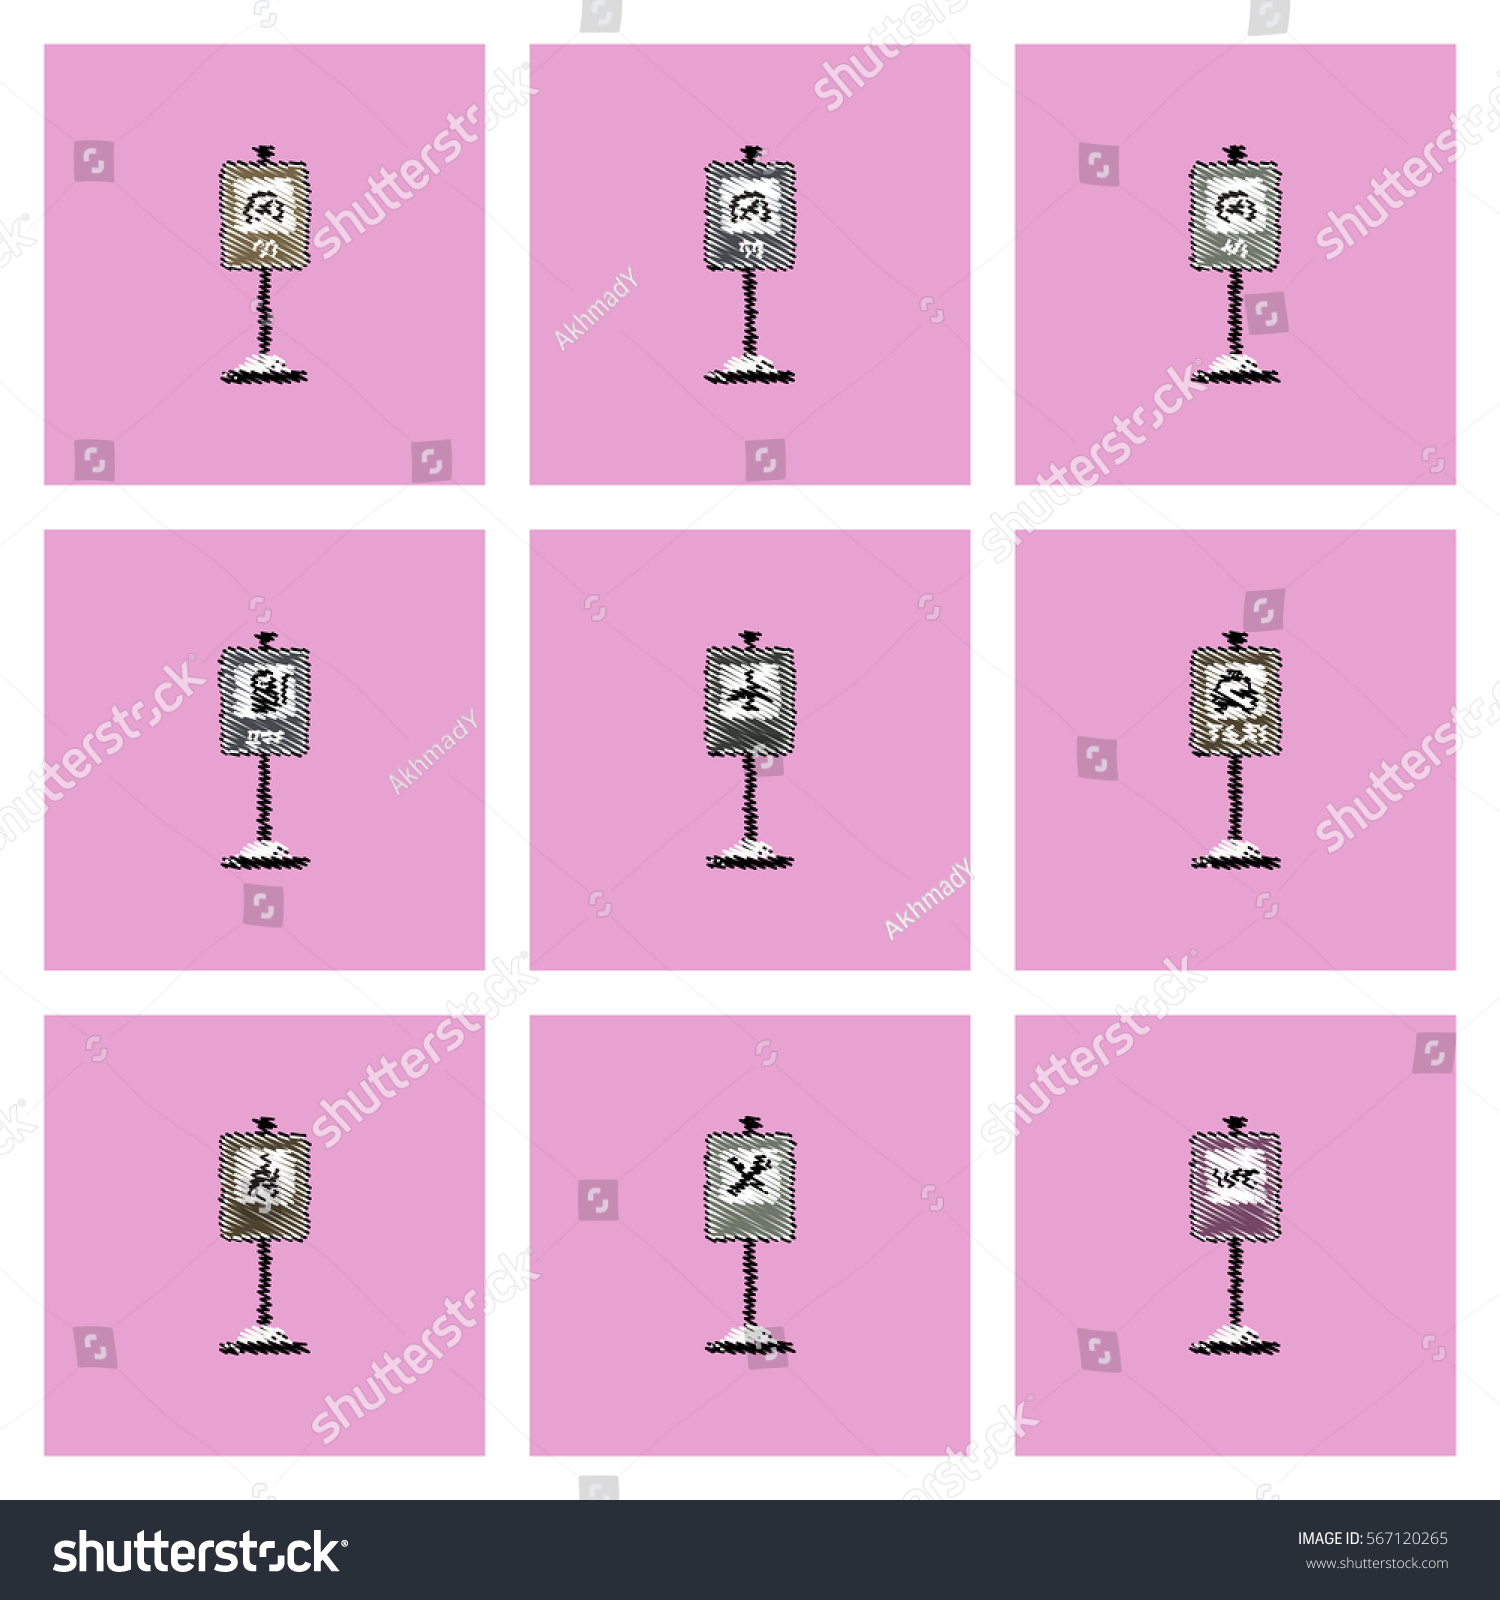 Collection Vector Icons Illustration Road Signs Stock Vector Royalty Free 567120265 Shutterstock